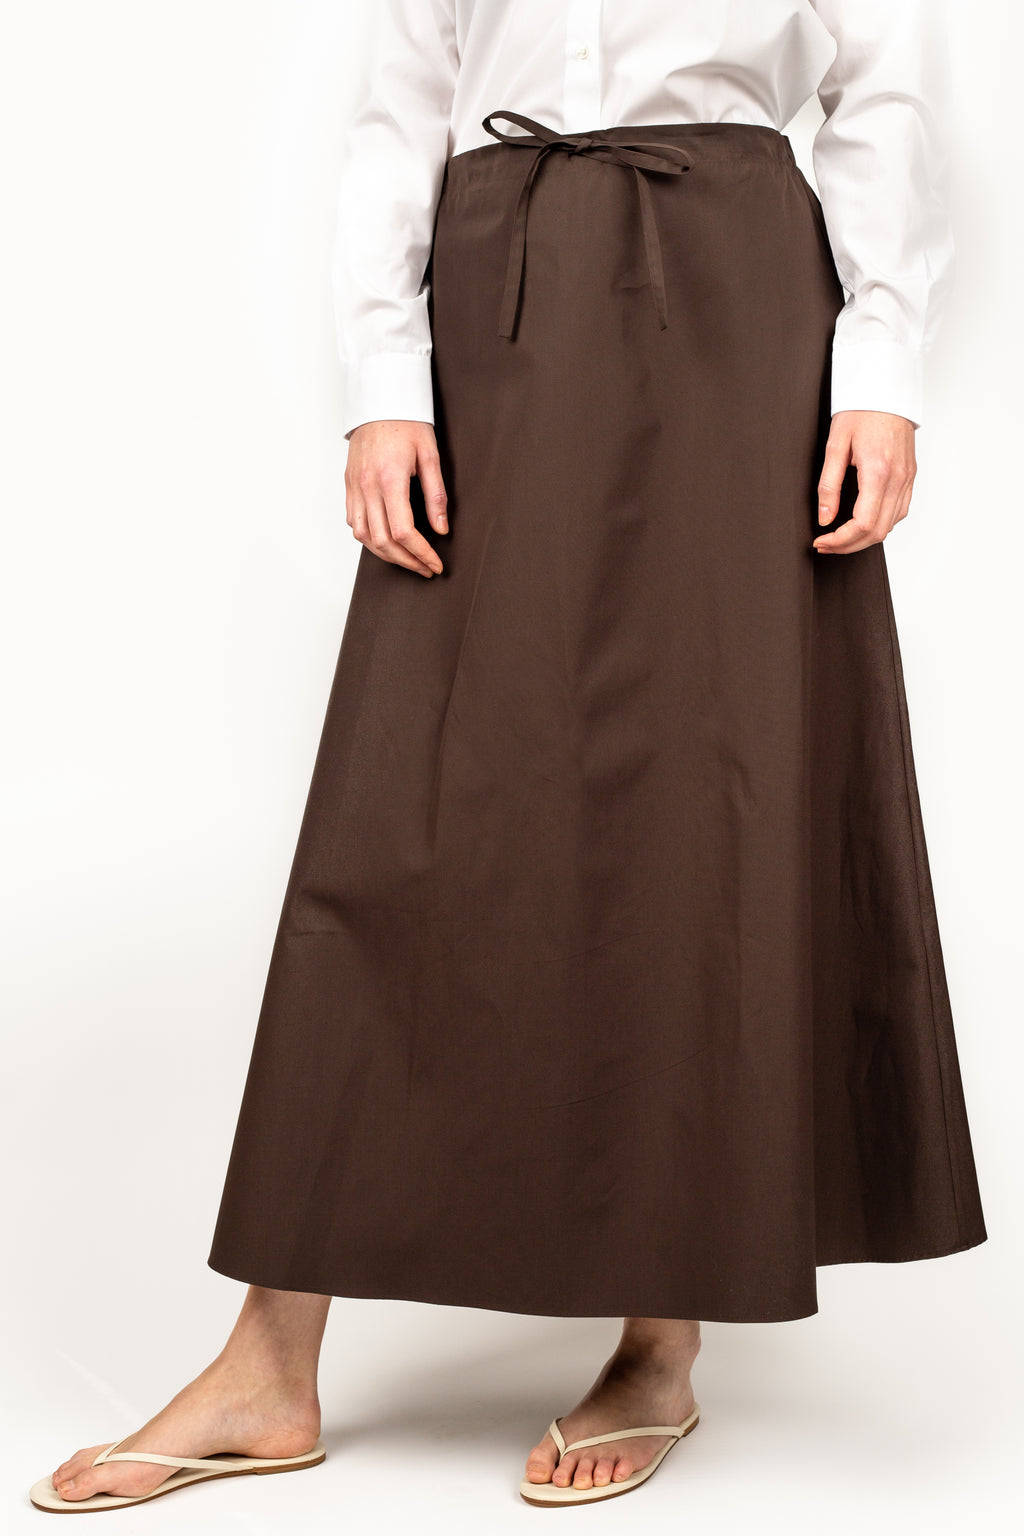 The Long Skirt Brown Cotton